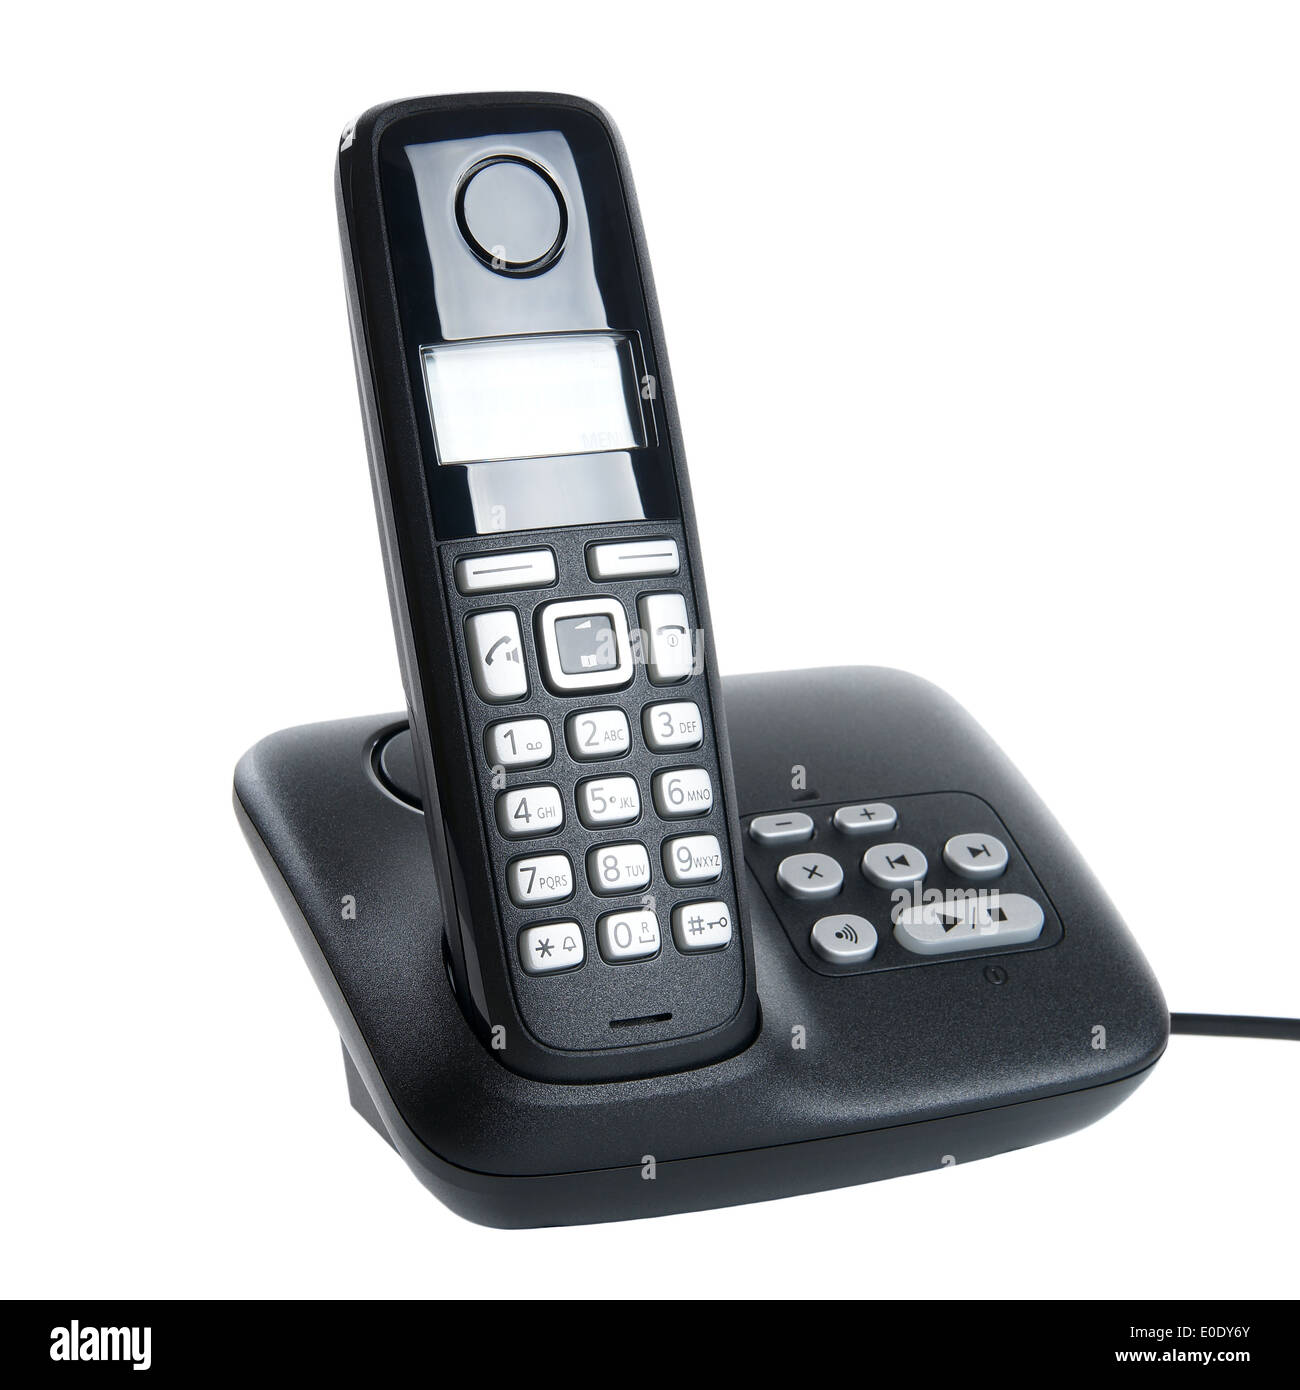 https://c8.alamy.com/comp/E0DY6Y/dect-phone-with-base-station-and-answering-machine-E0DY6Y.jpg